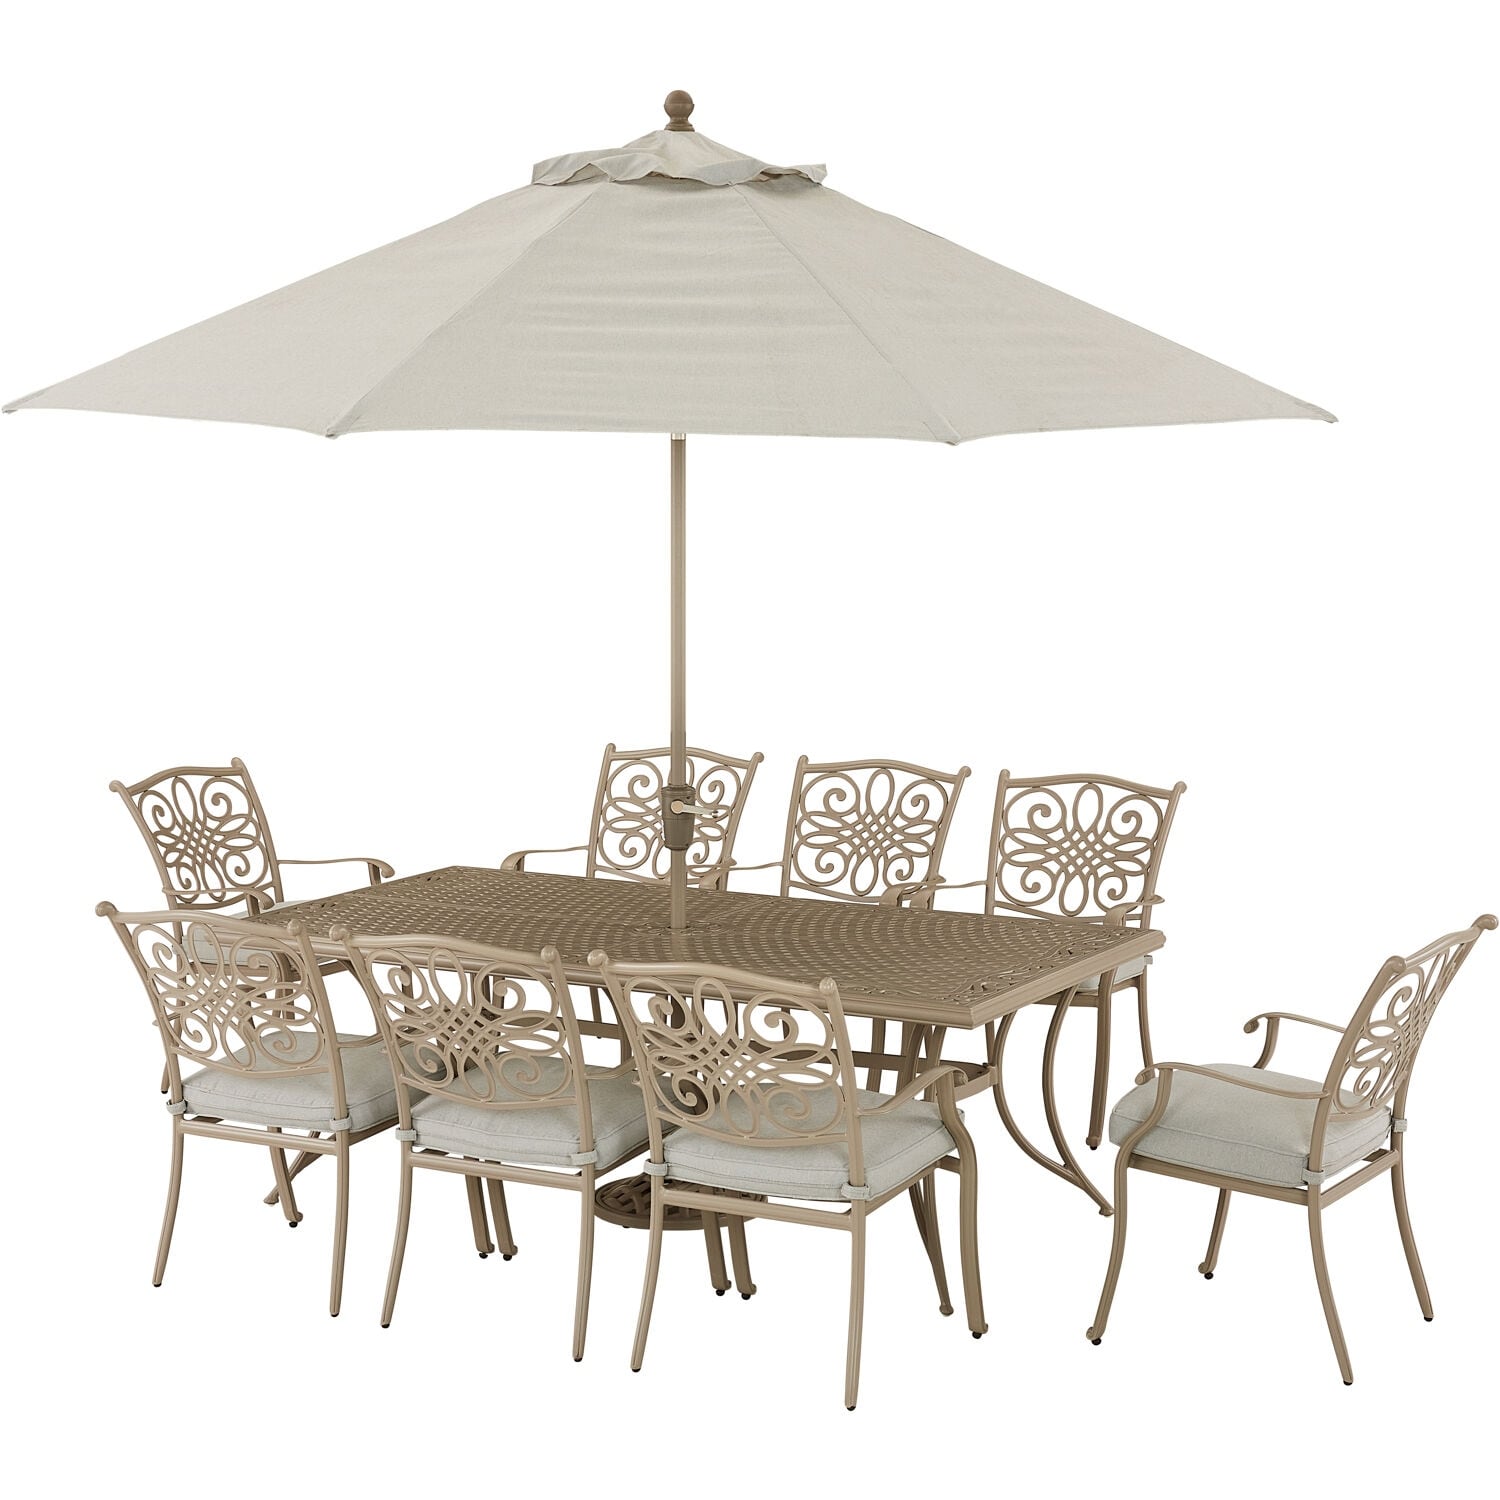 Hanover Traditions 9-piece Dining Set With 8 Stationary Chairs And 42-in. X 84-in. Table  11-ft. Umbrella  And Stand  Sand